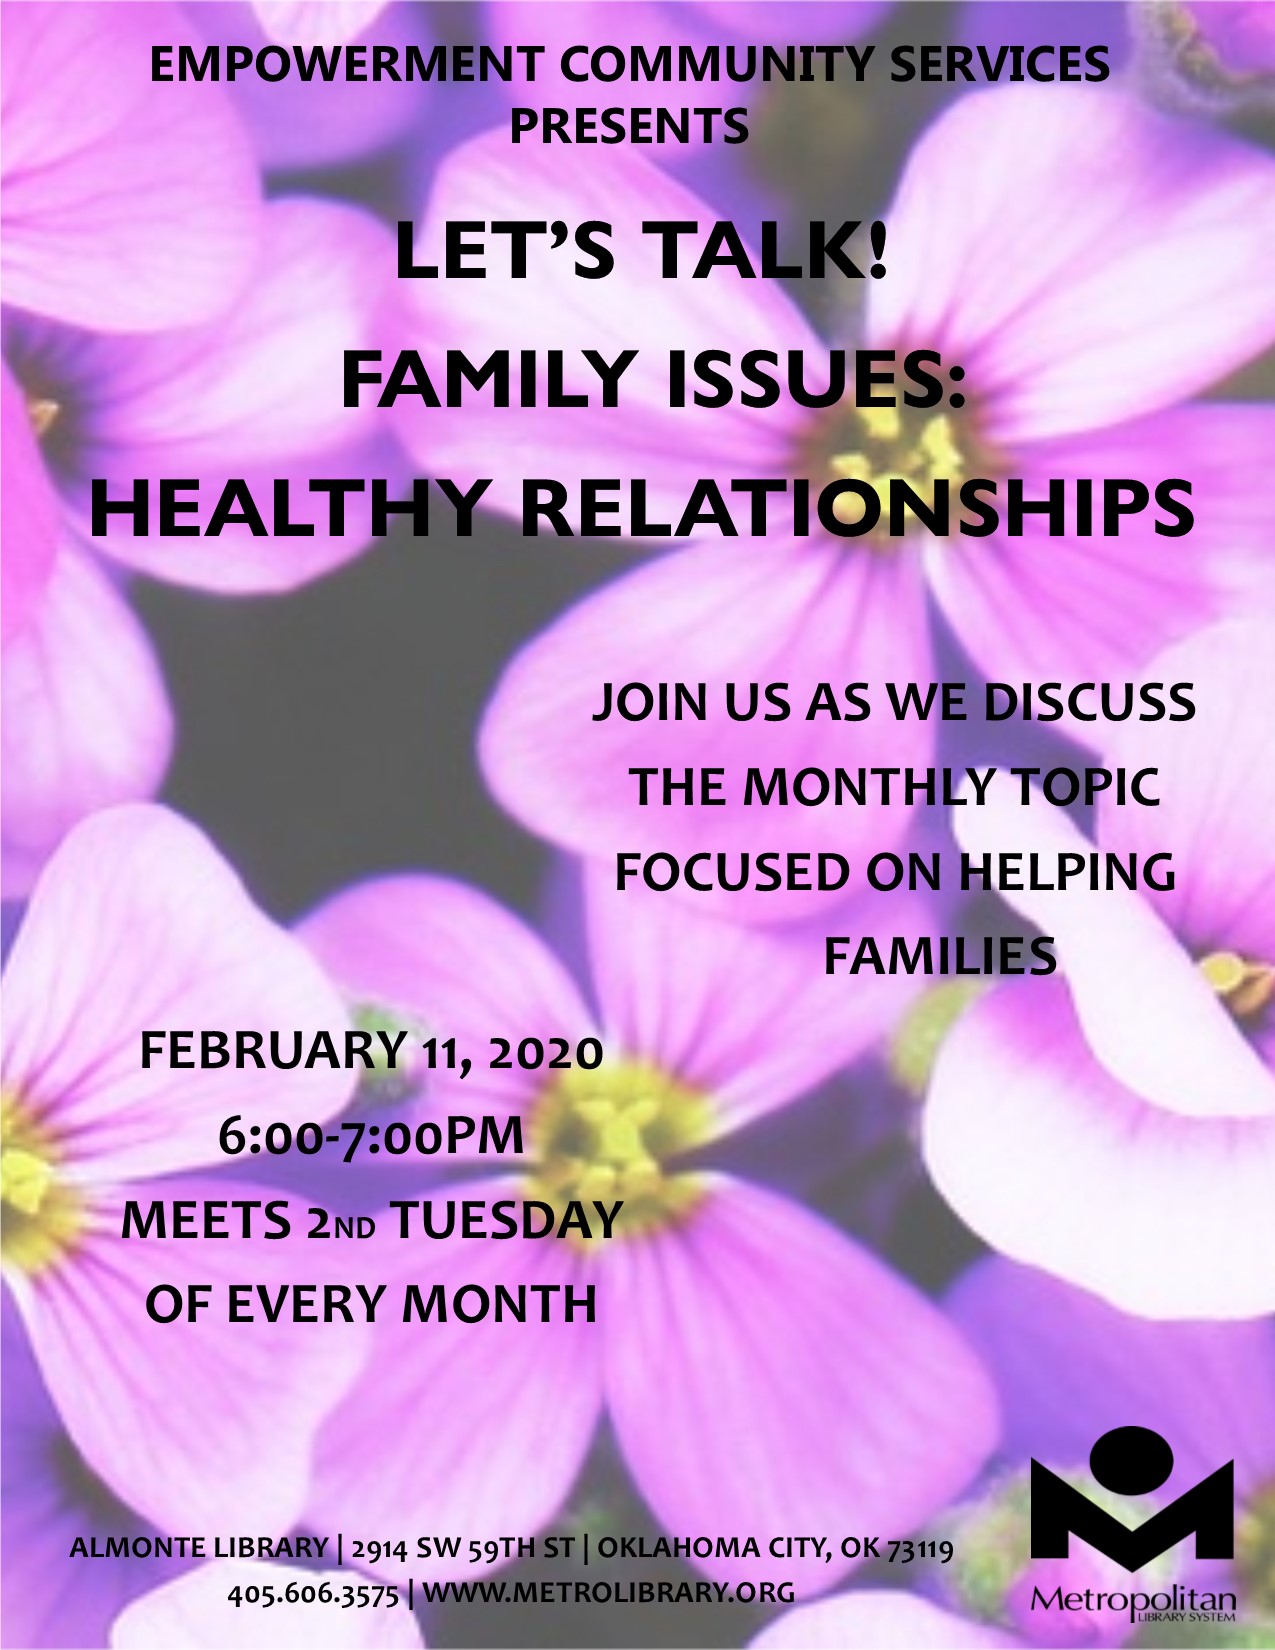 LET'S TALK! Family Issues